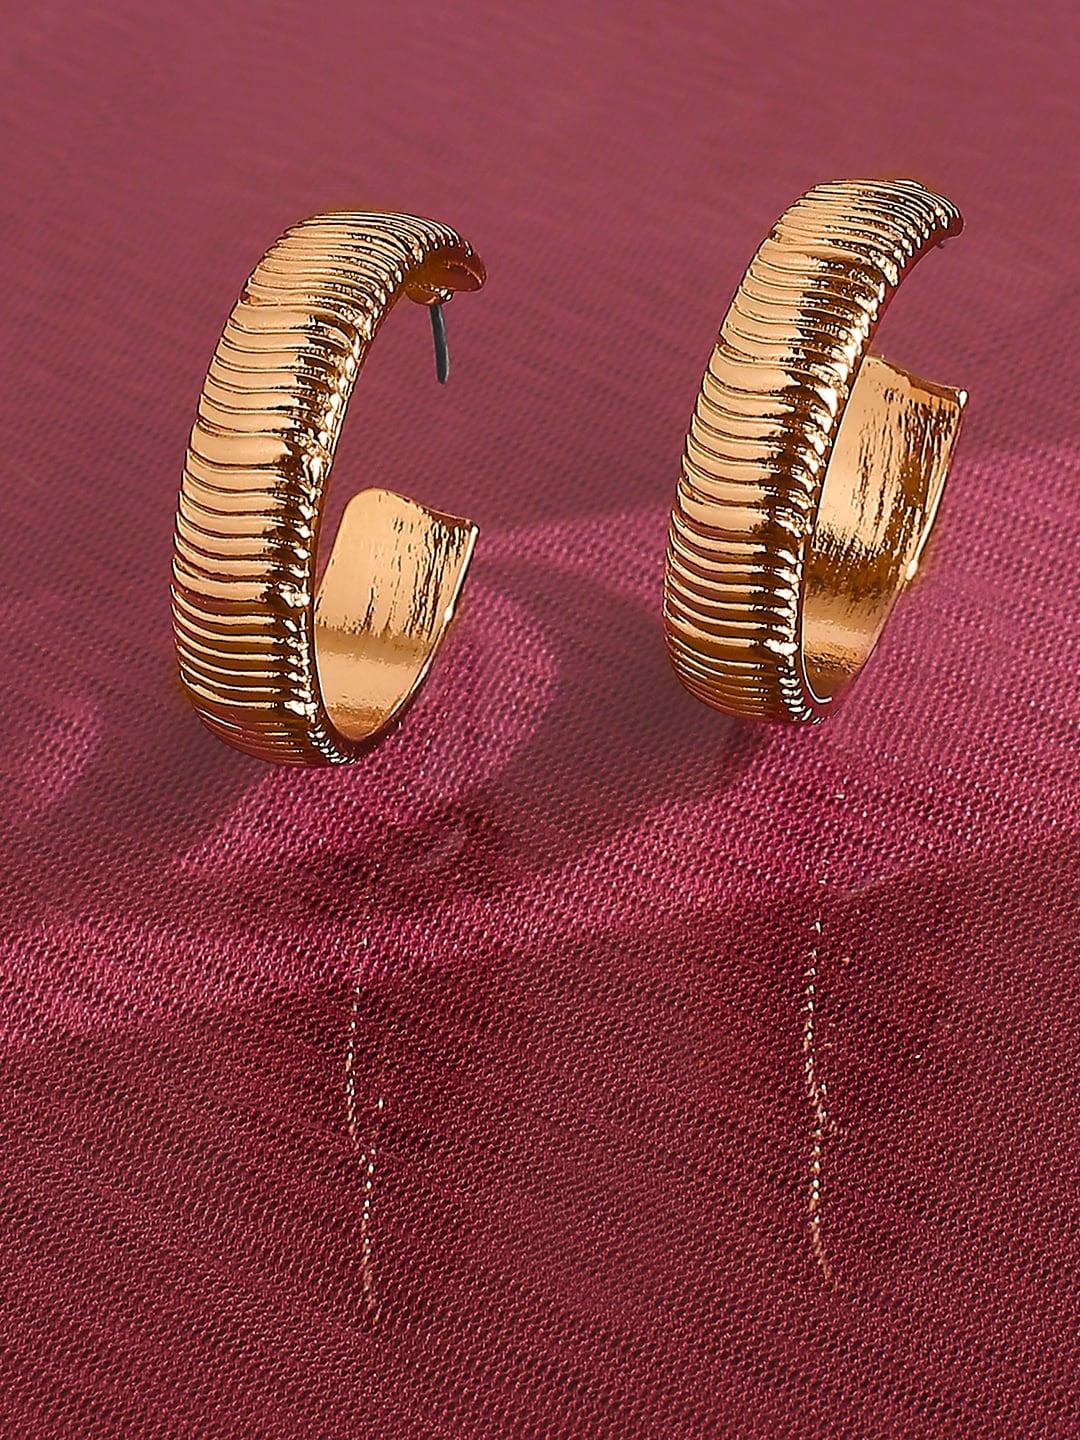 Lilly & sparkle Gold-Plated Contemporary Hoop Earrings